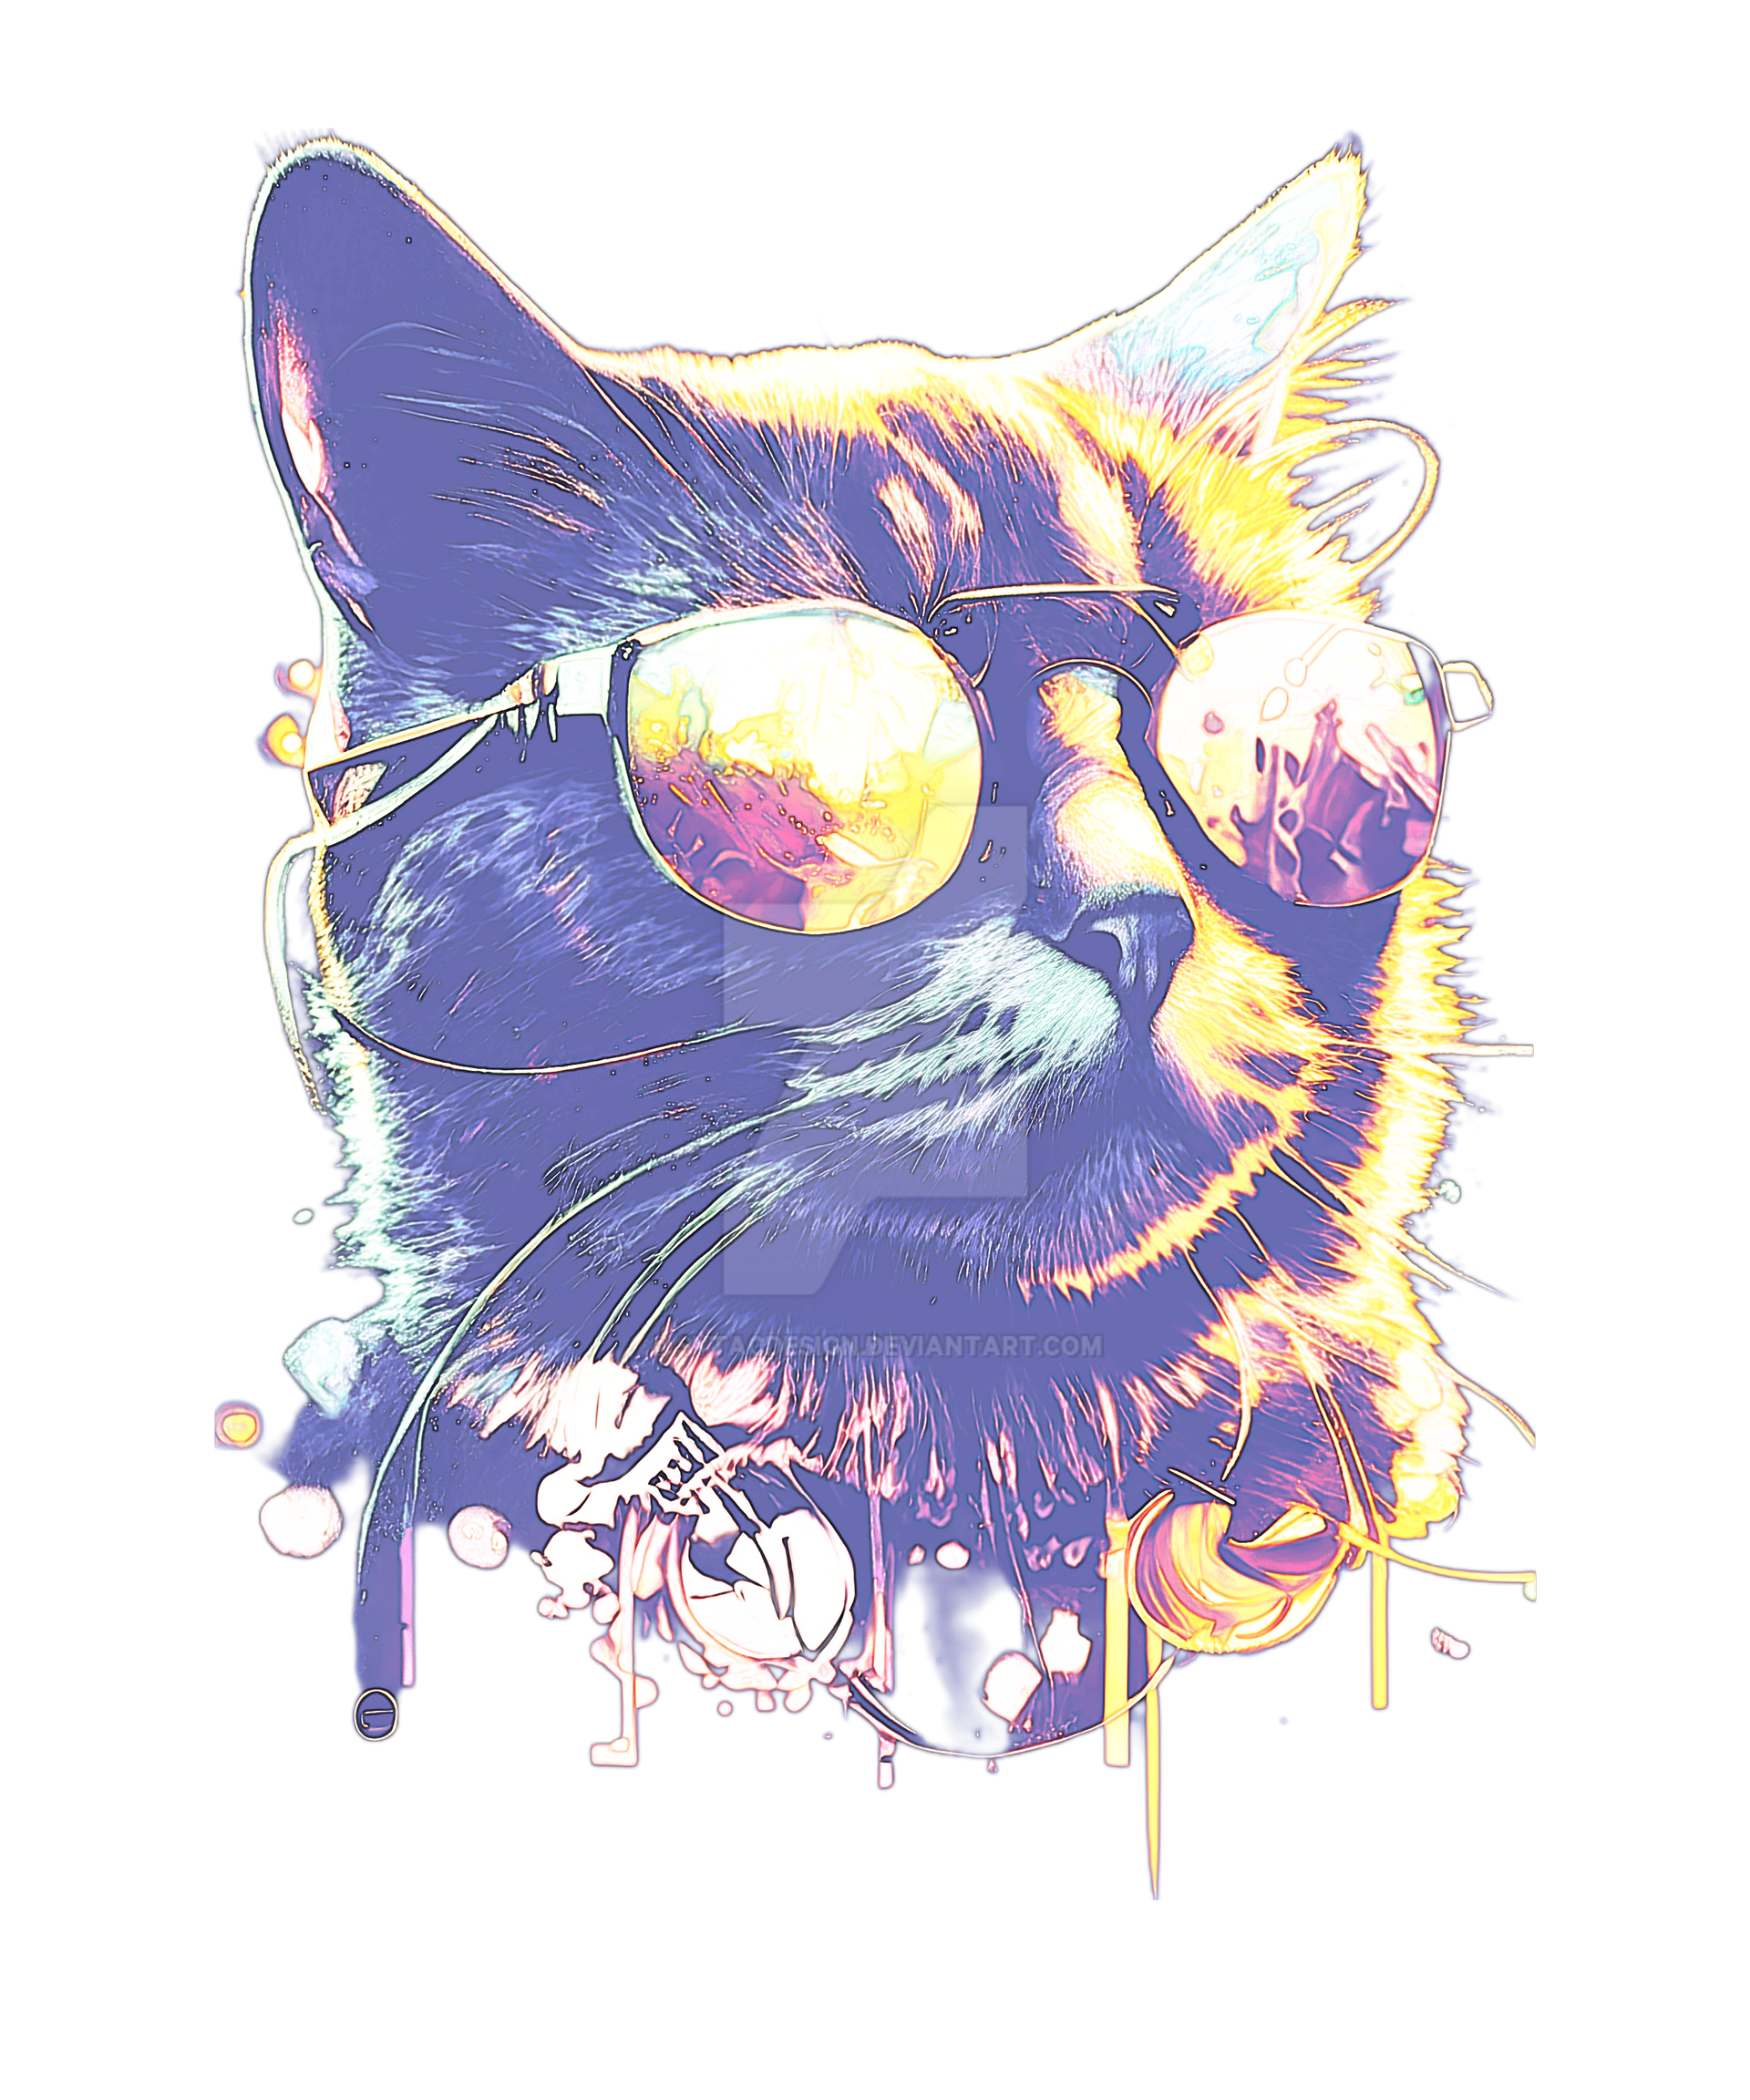 portrait Sunglasses Kitty Cool Hip Cat by sytacdesign on DeviantArt